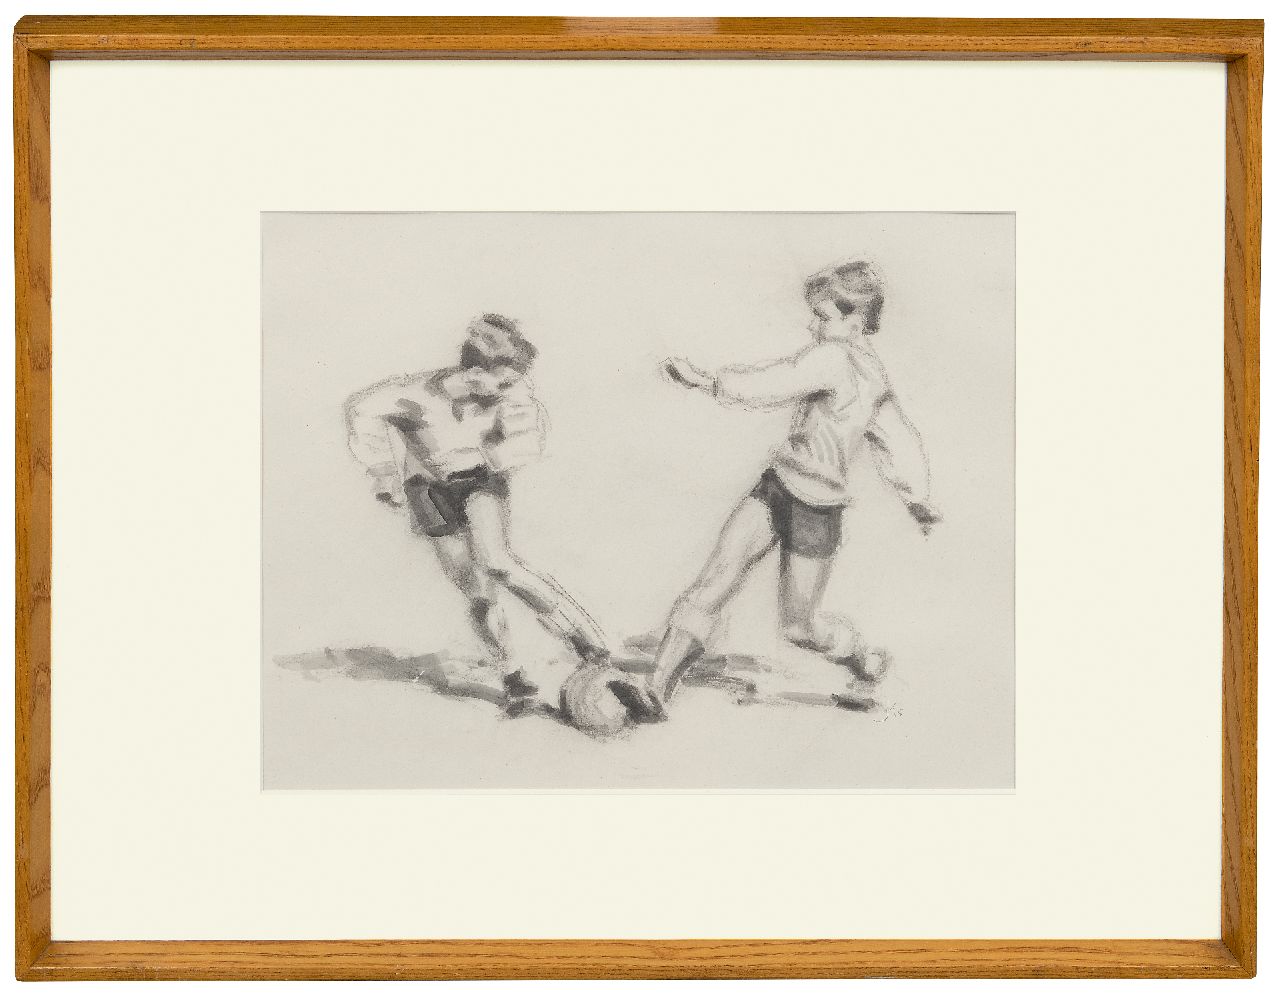 Kempers B.J.E.  | Bernardus Johannes Everhardus Kempers | Watercolours and drawings offered for sale | Football player 3, charcoal and ink on paper 38.0 x 48.0 cm, signed l.r. with monogram and jaren '50